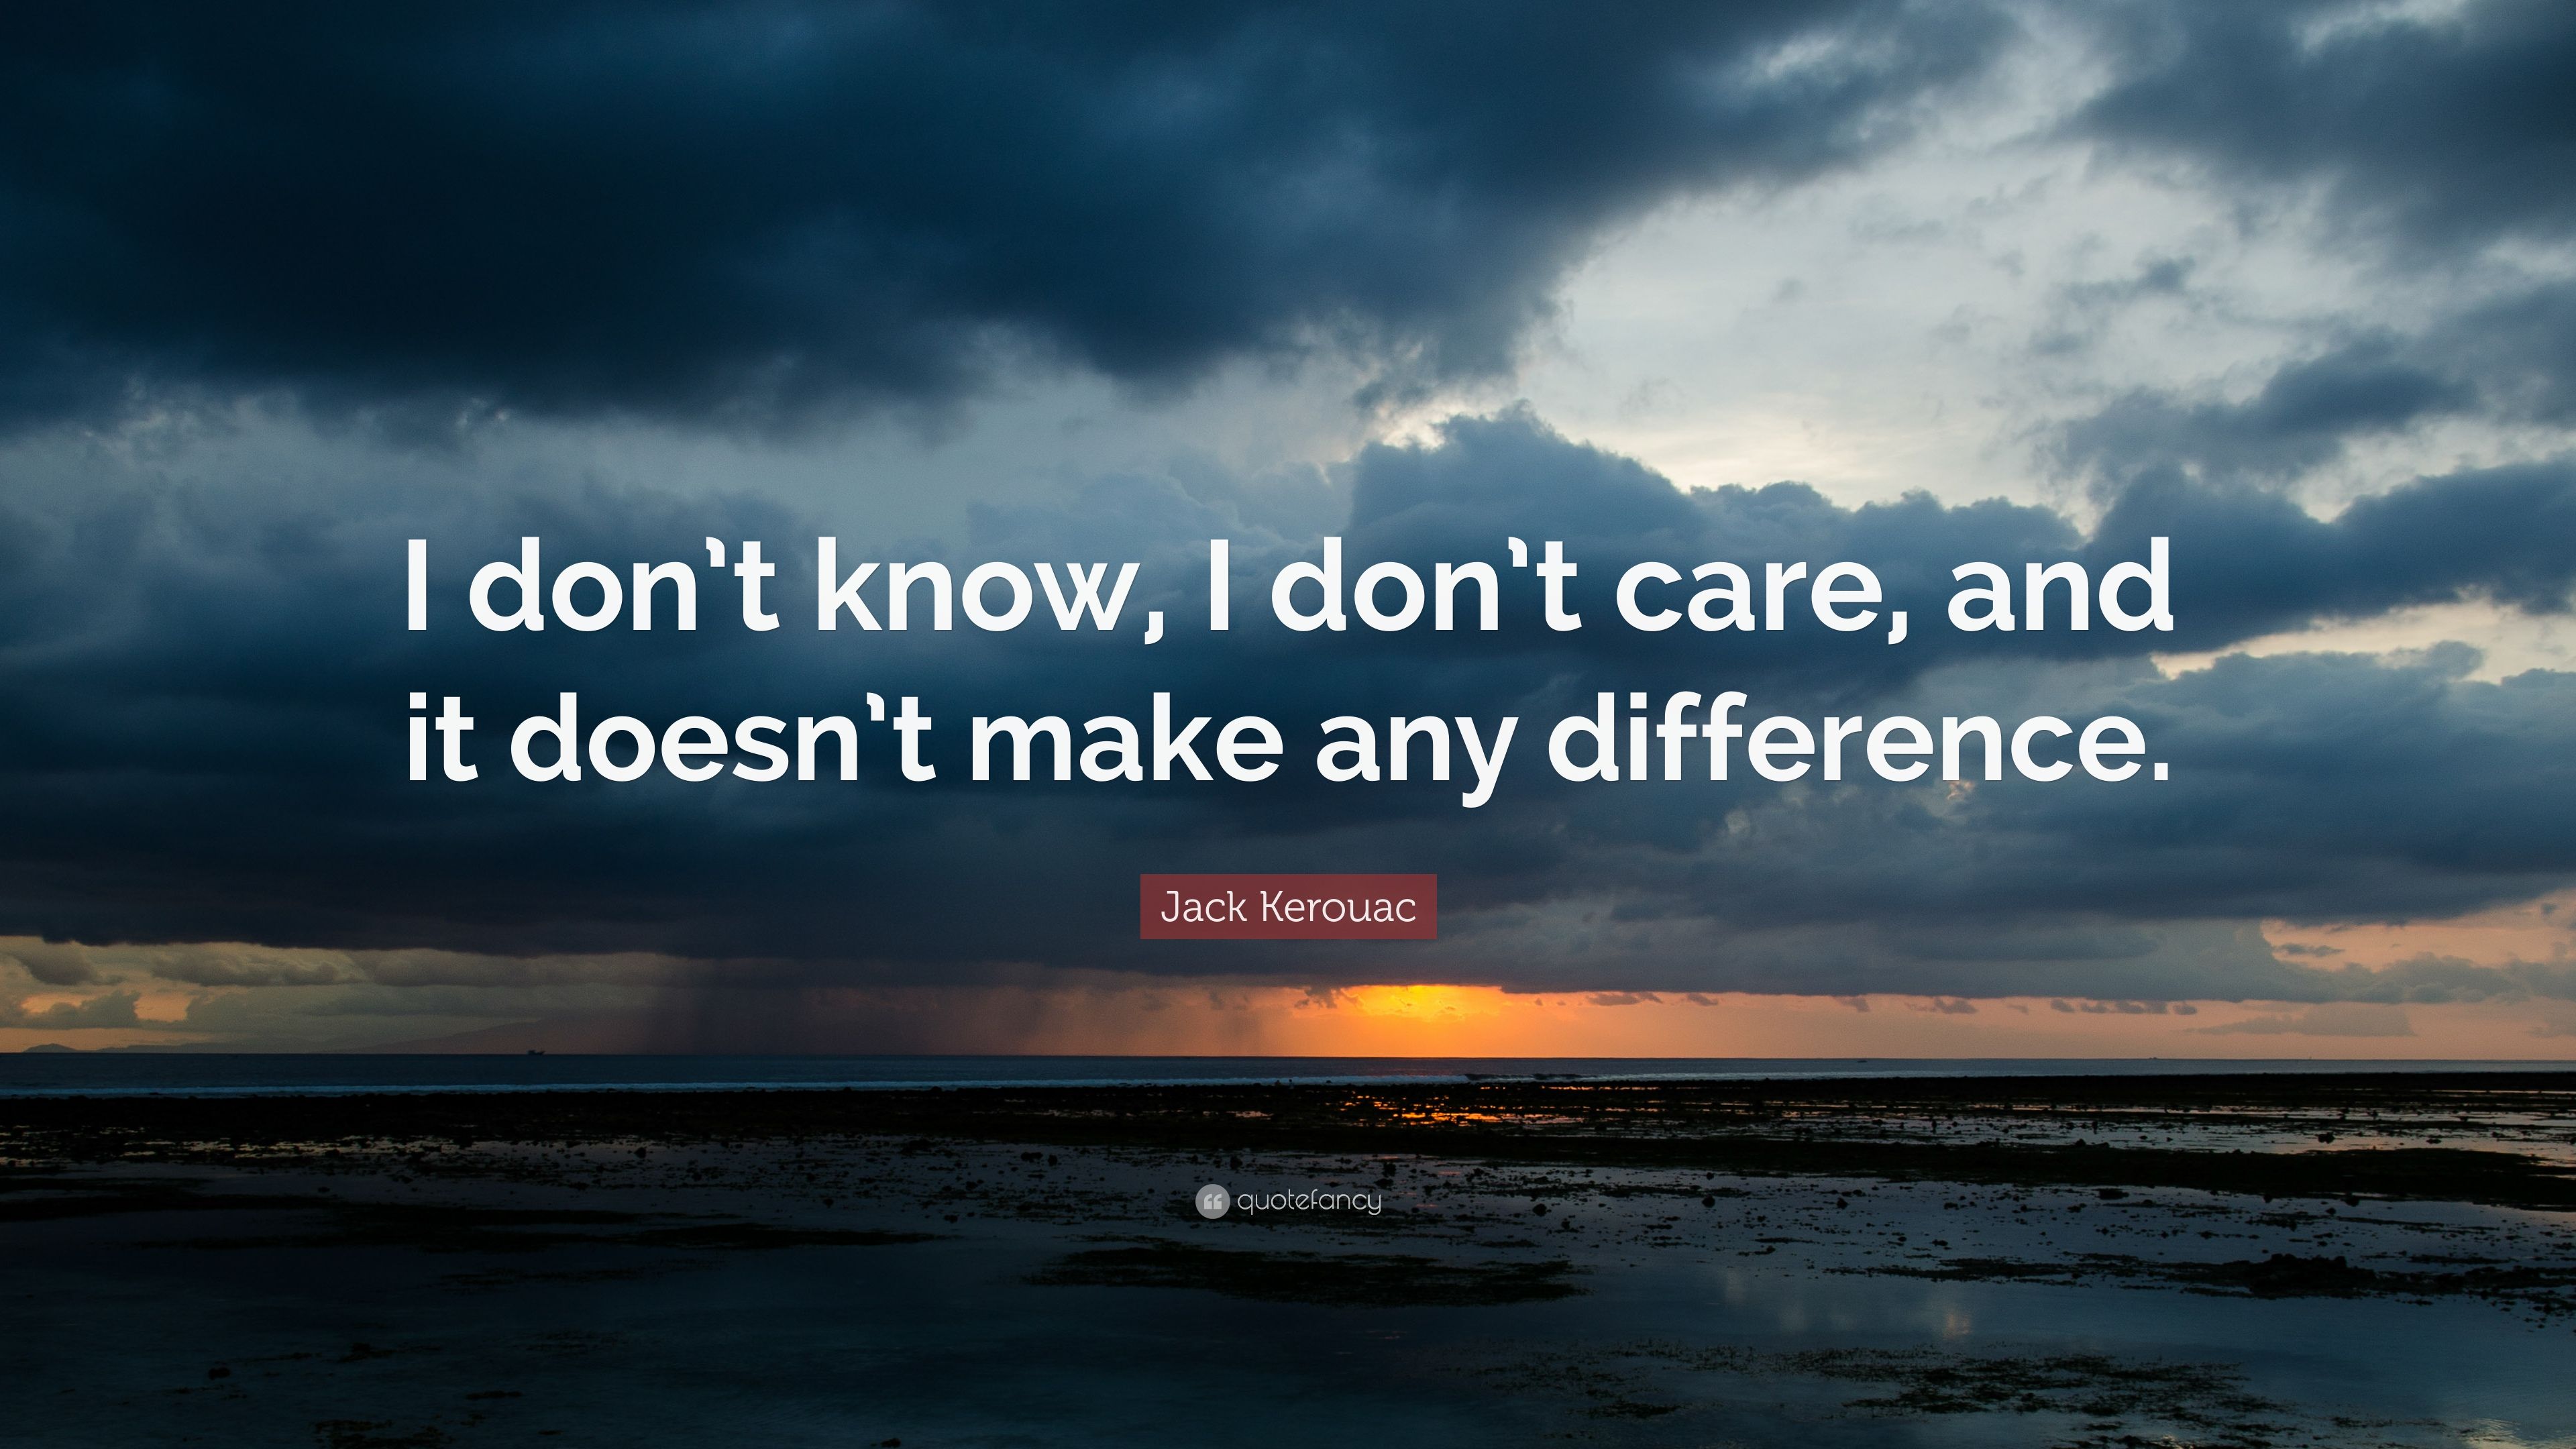 Jack Kerouac Quote: “I don't know, I don't care, and it doesn't